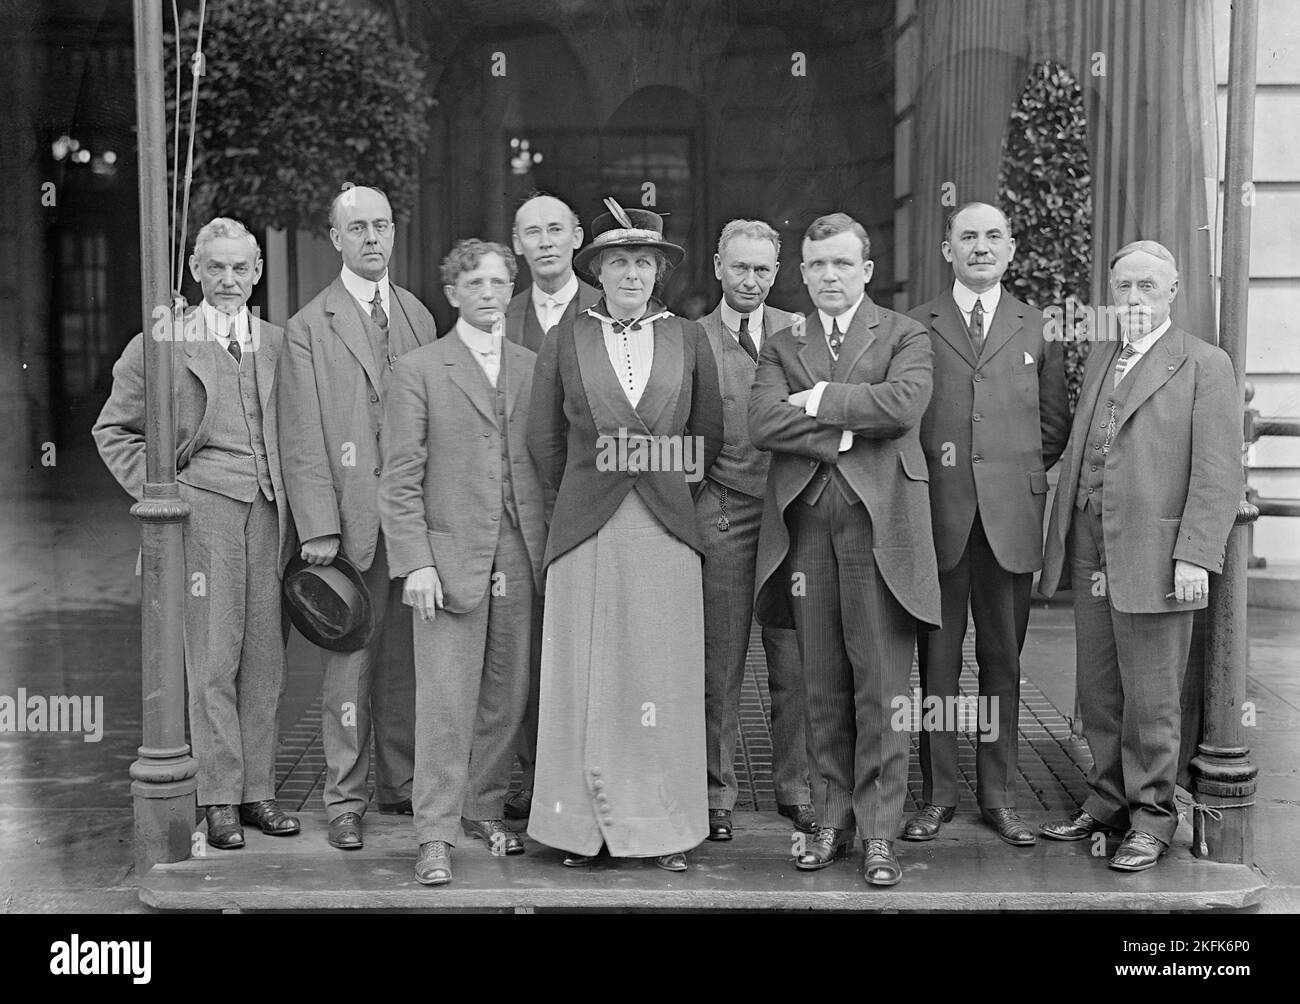 Commission On Industrial Relations Appointed By President Under Congressional Resolution, June 1913; Reported In 1915. James O'Connell, Vice President, A.F. of L. (American Federation of Labor); Frederick A. Delano; Prof. John R. Commons of University of Wisconsin-Madison; Austin B. Garretson; suffragist Florence Jaffray Harriman; Samuel Thruston Ballard; Frank P. Walsh; Harris Weinstock; John Brown Lennon. Stock Photo